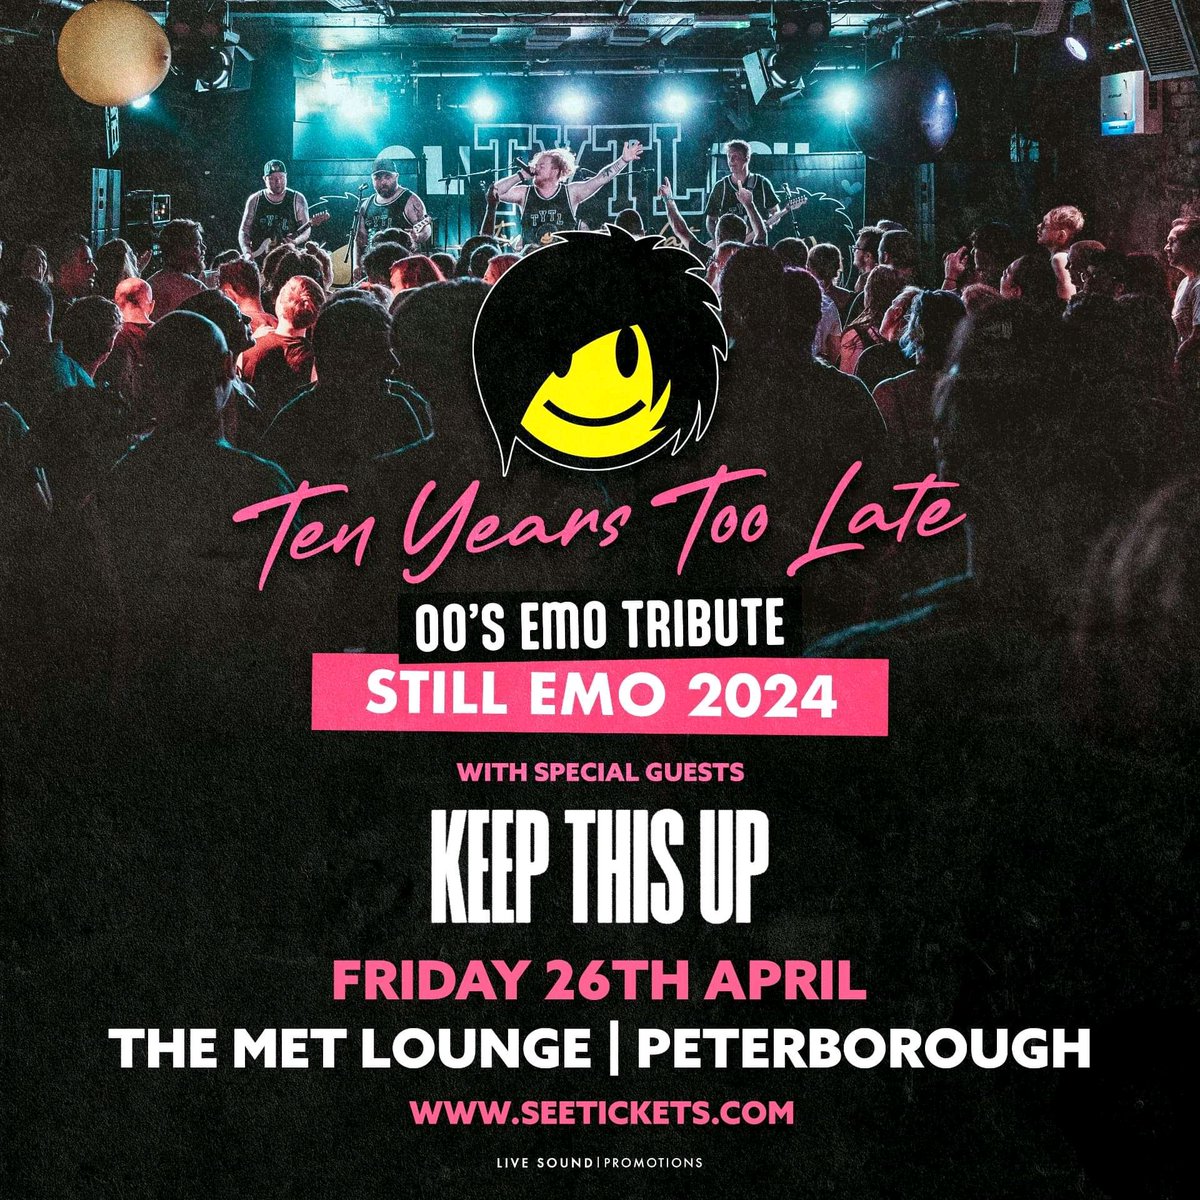 TOMORROW NIGHT IS NEARLY SOLD OUT Don't miss out!! 🎟️🎟️🎟️ tinyurl.com/Tenyearstoolate